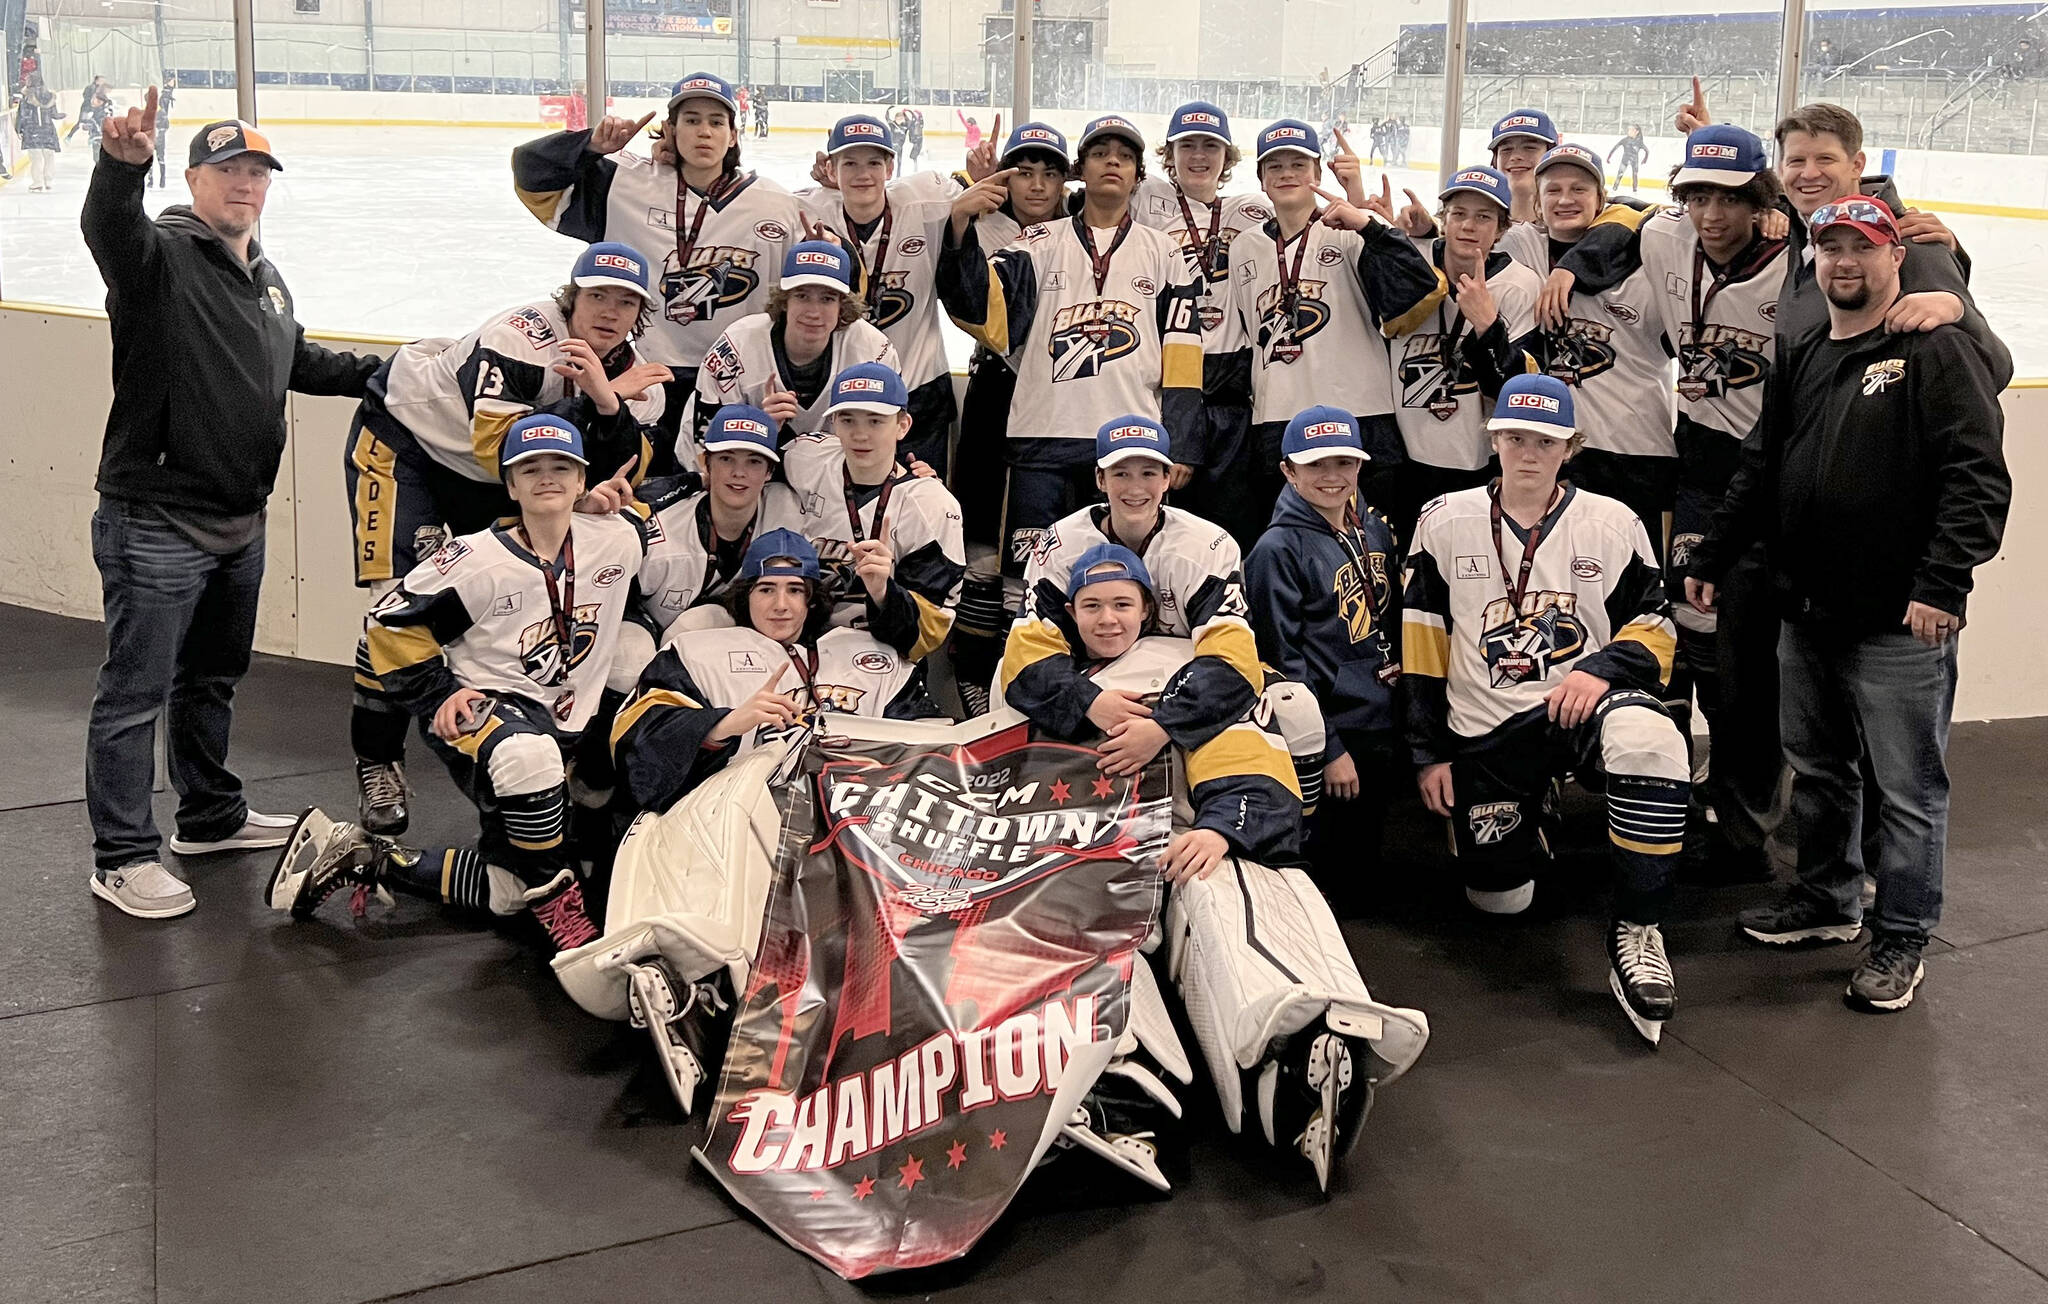 The Alaska Blades Under-14 AAA team celebrates after winning the CCM Chi-Town Shuffle from April 22 to 24, 2022, in Chicago. (Photo provided)